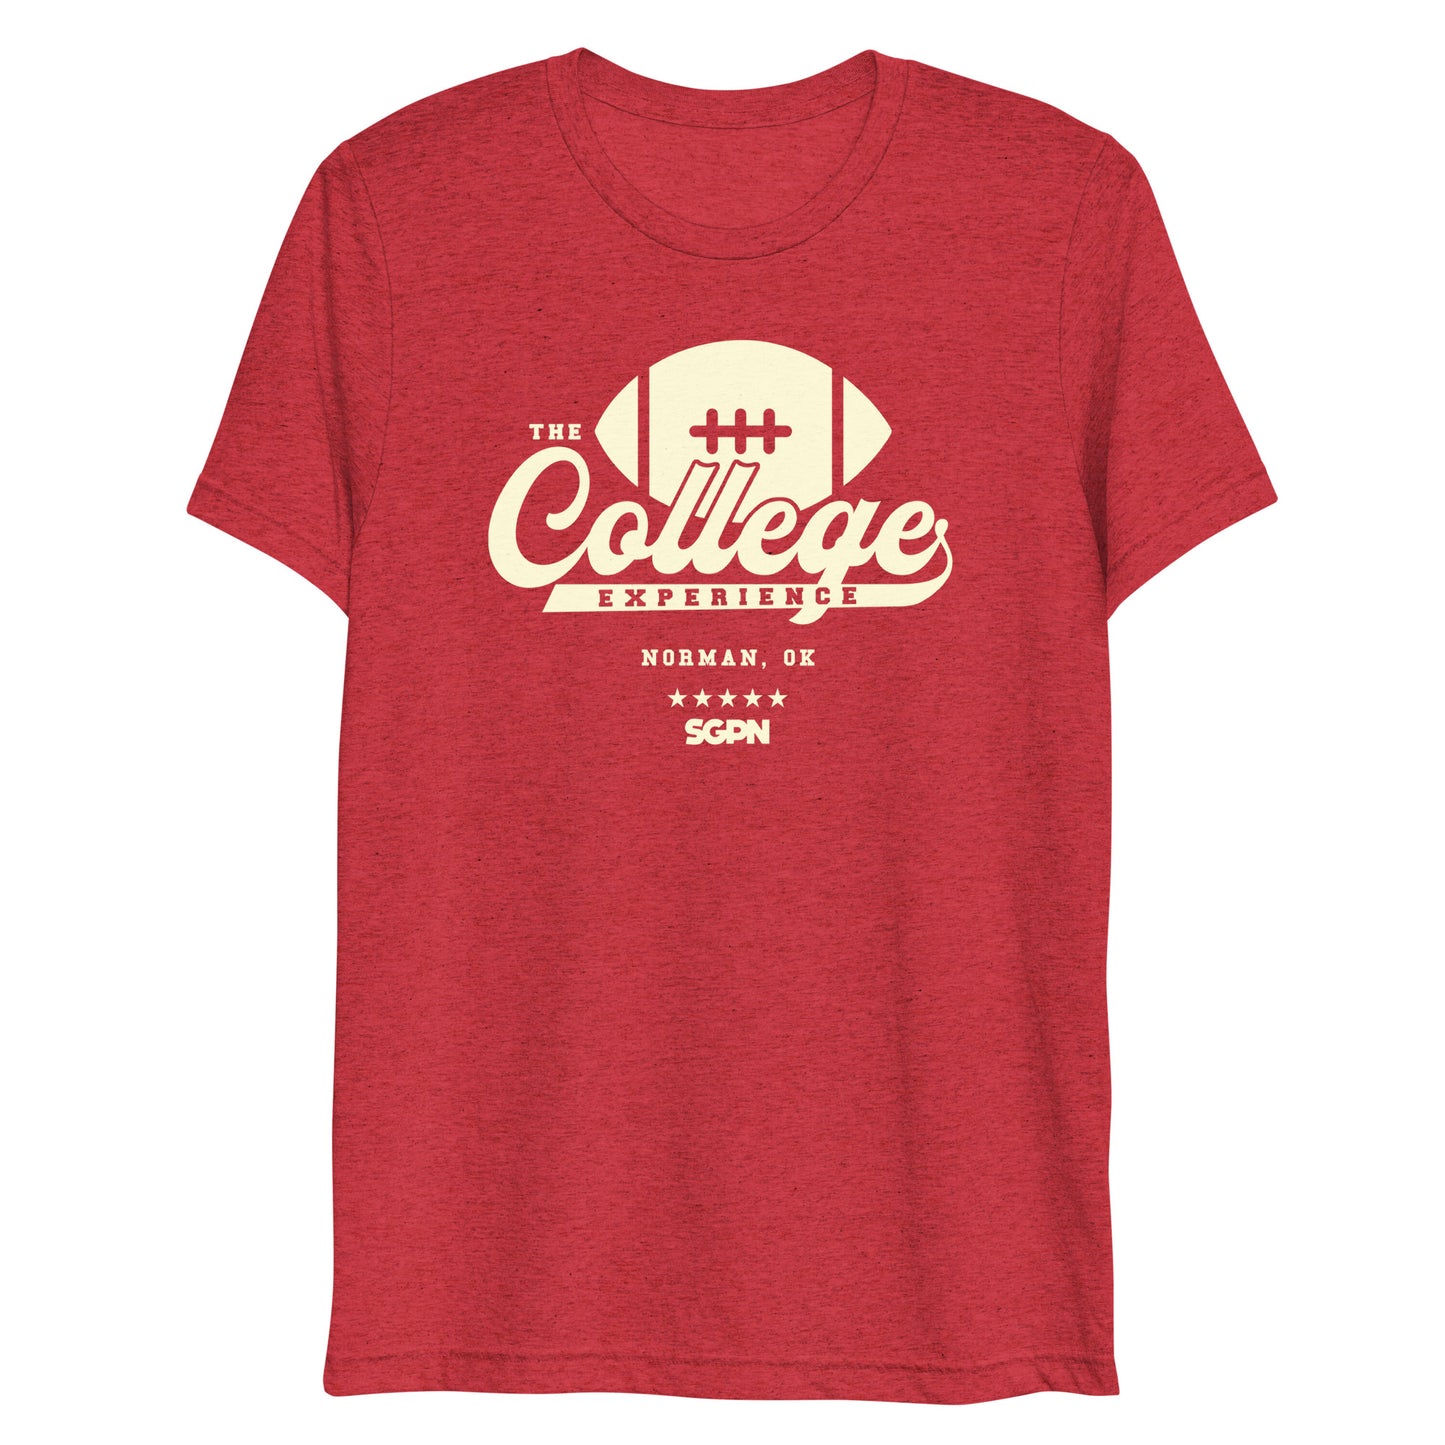 The College Football Experience - Norman edition - Red Short sleeve t-shirt